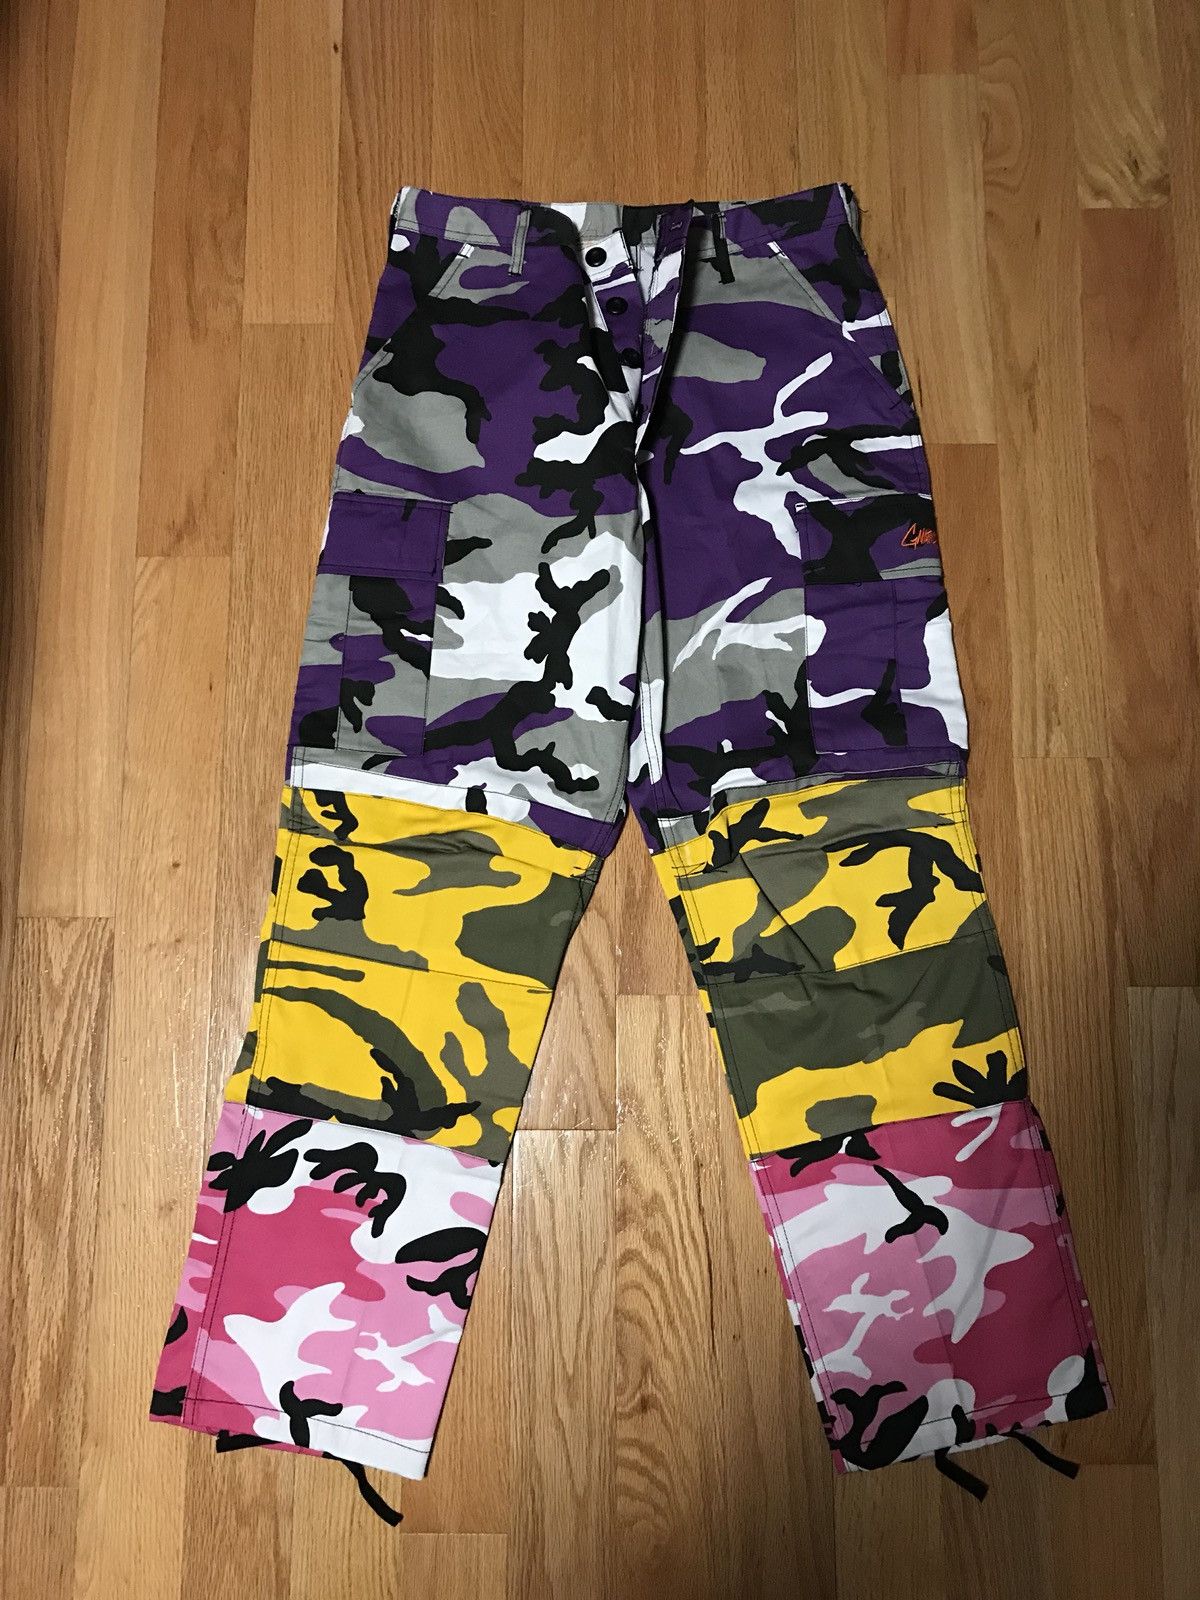 Narcotic Gdc Gnarcotic Tri-camo Pants V2 | Grailed